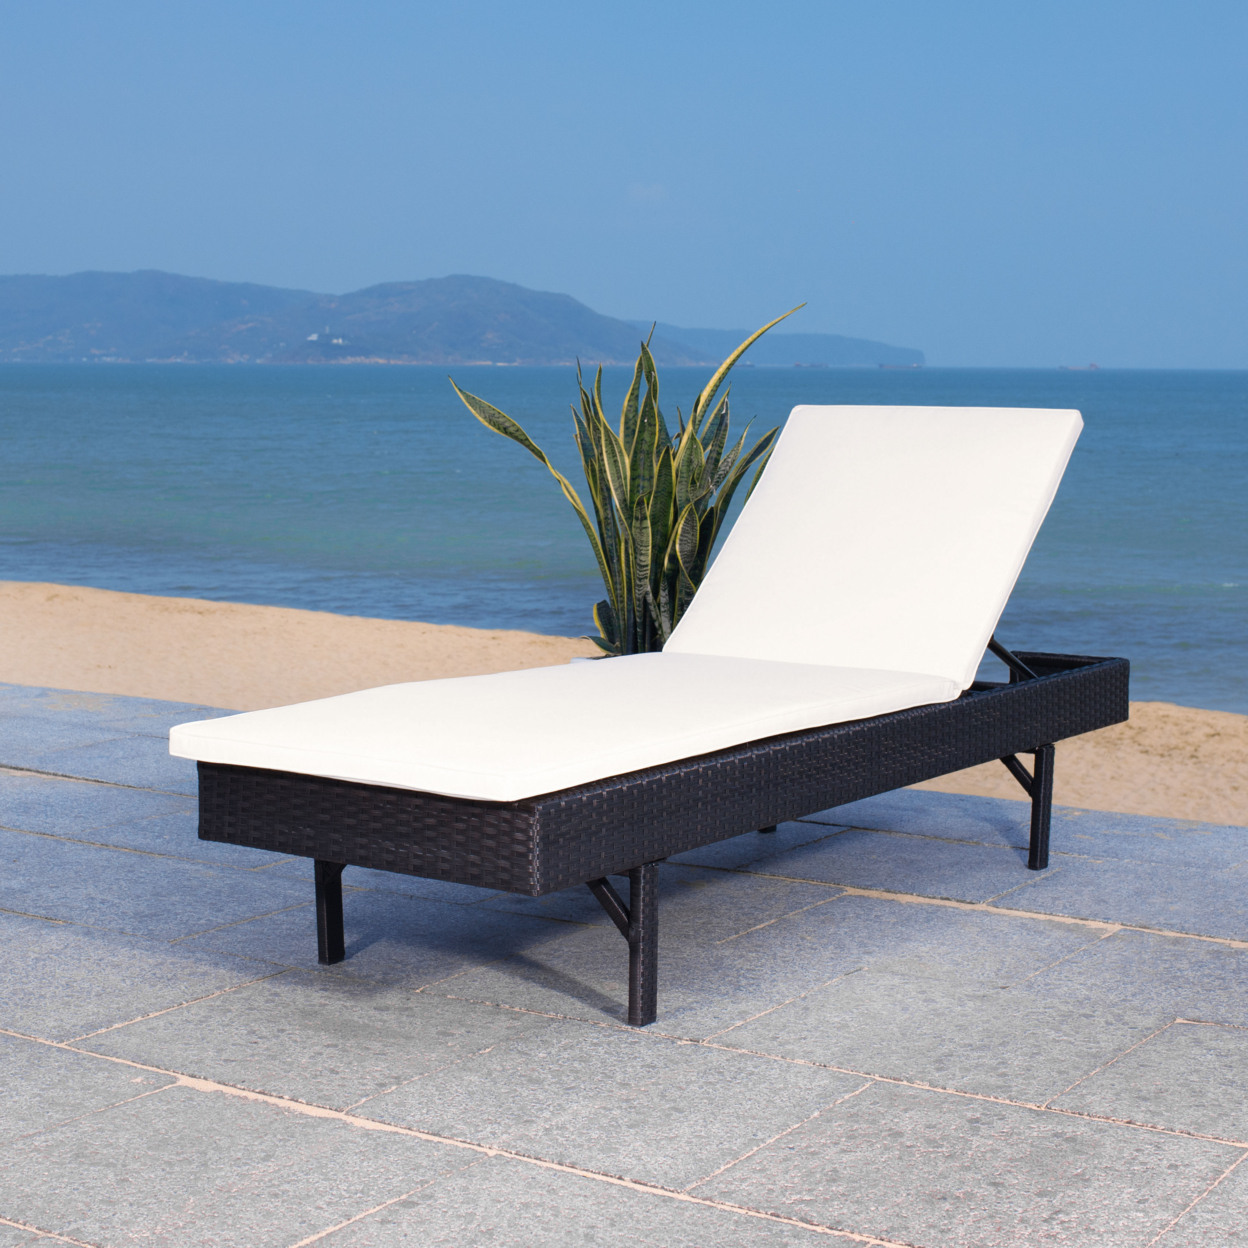 SAFAVIEH Outdoor Collection Cam Chaise Sunlounger Black/Beige